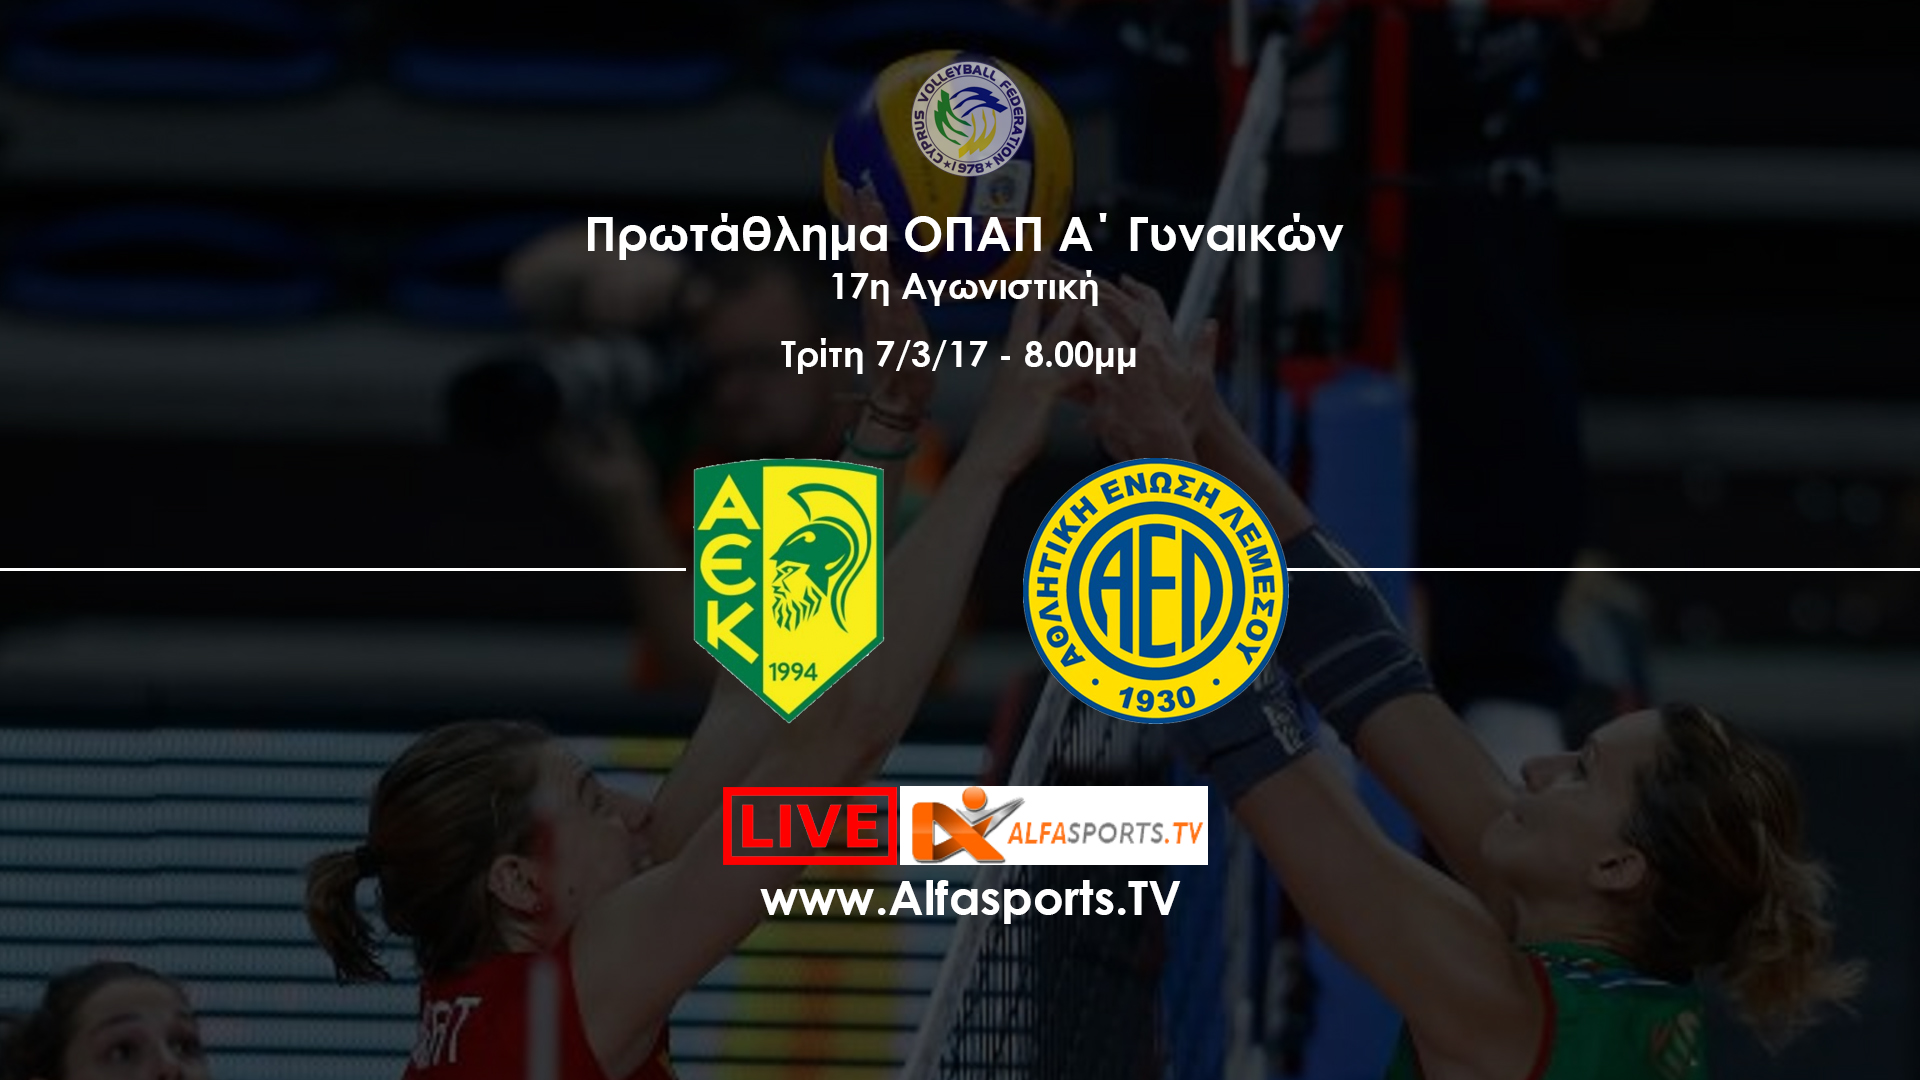 LIVE VOLLEYBALL – ΑΕΚ vs ΑΕΛ